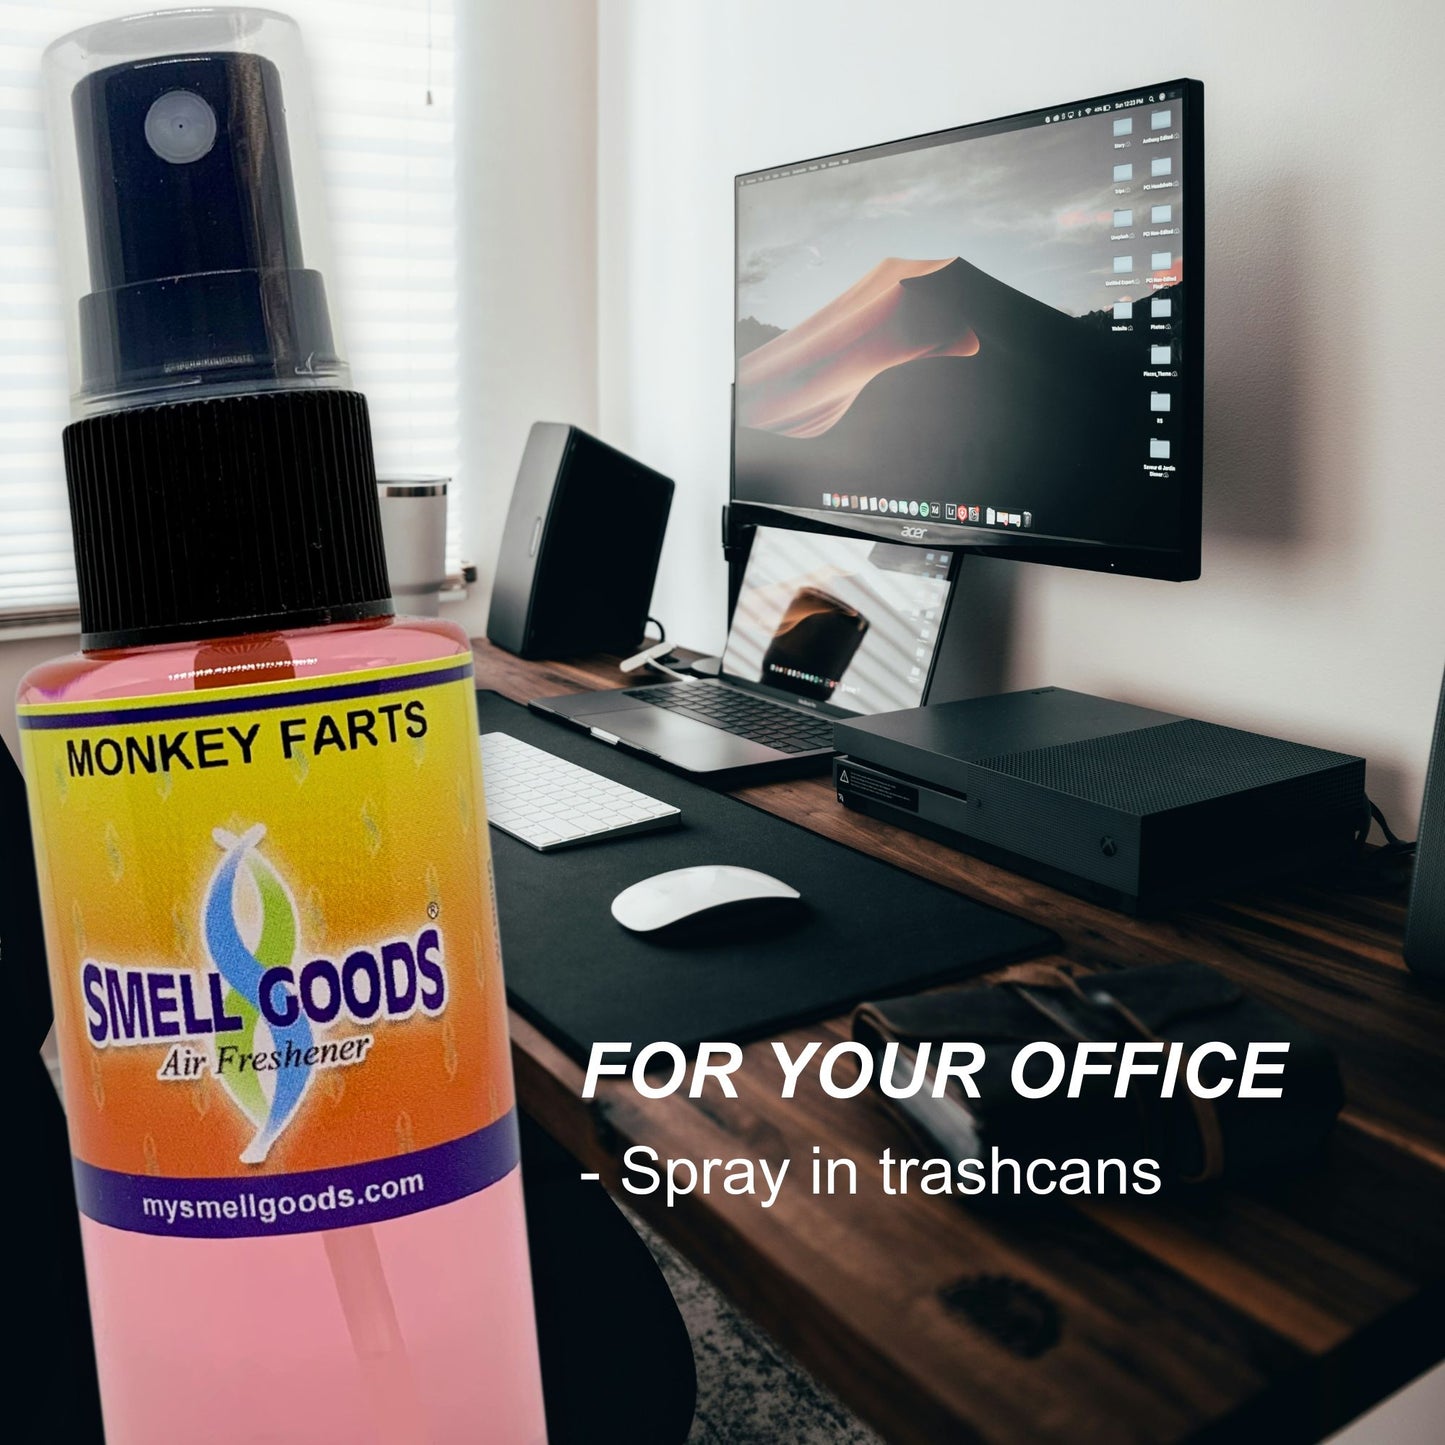 Monkey Farts Air Freshener by Smell Goods can be used in your office.